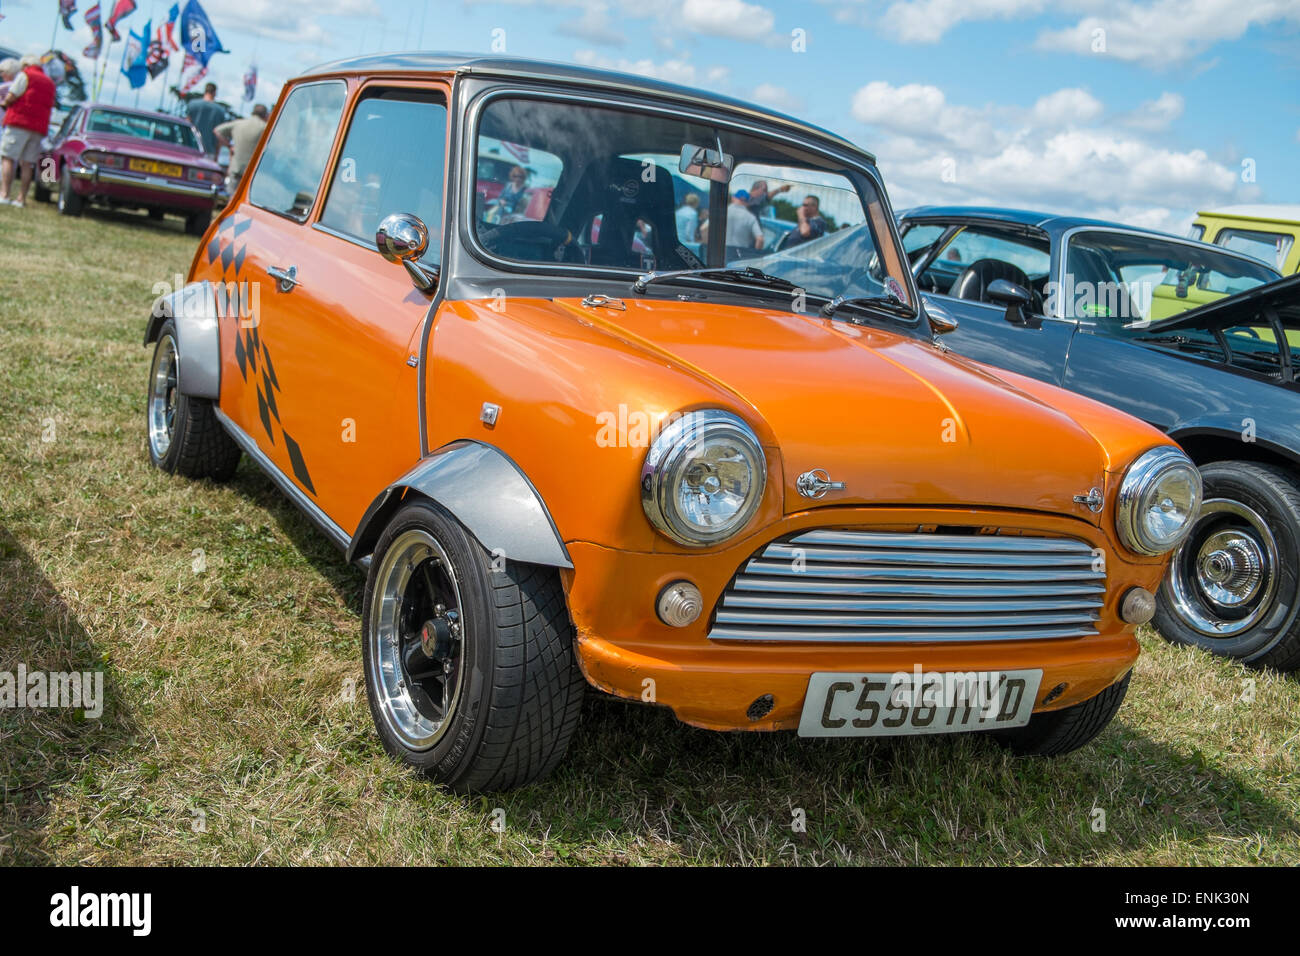 WINDSOR, BERKSHIRE, UK- AUGUST 3, 2014: An Orange Classic Mini on show at a Classic Car Show in August 2013. Stock Photo